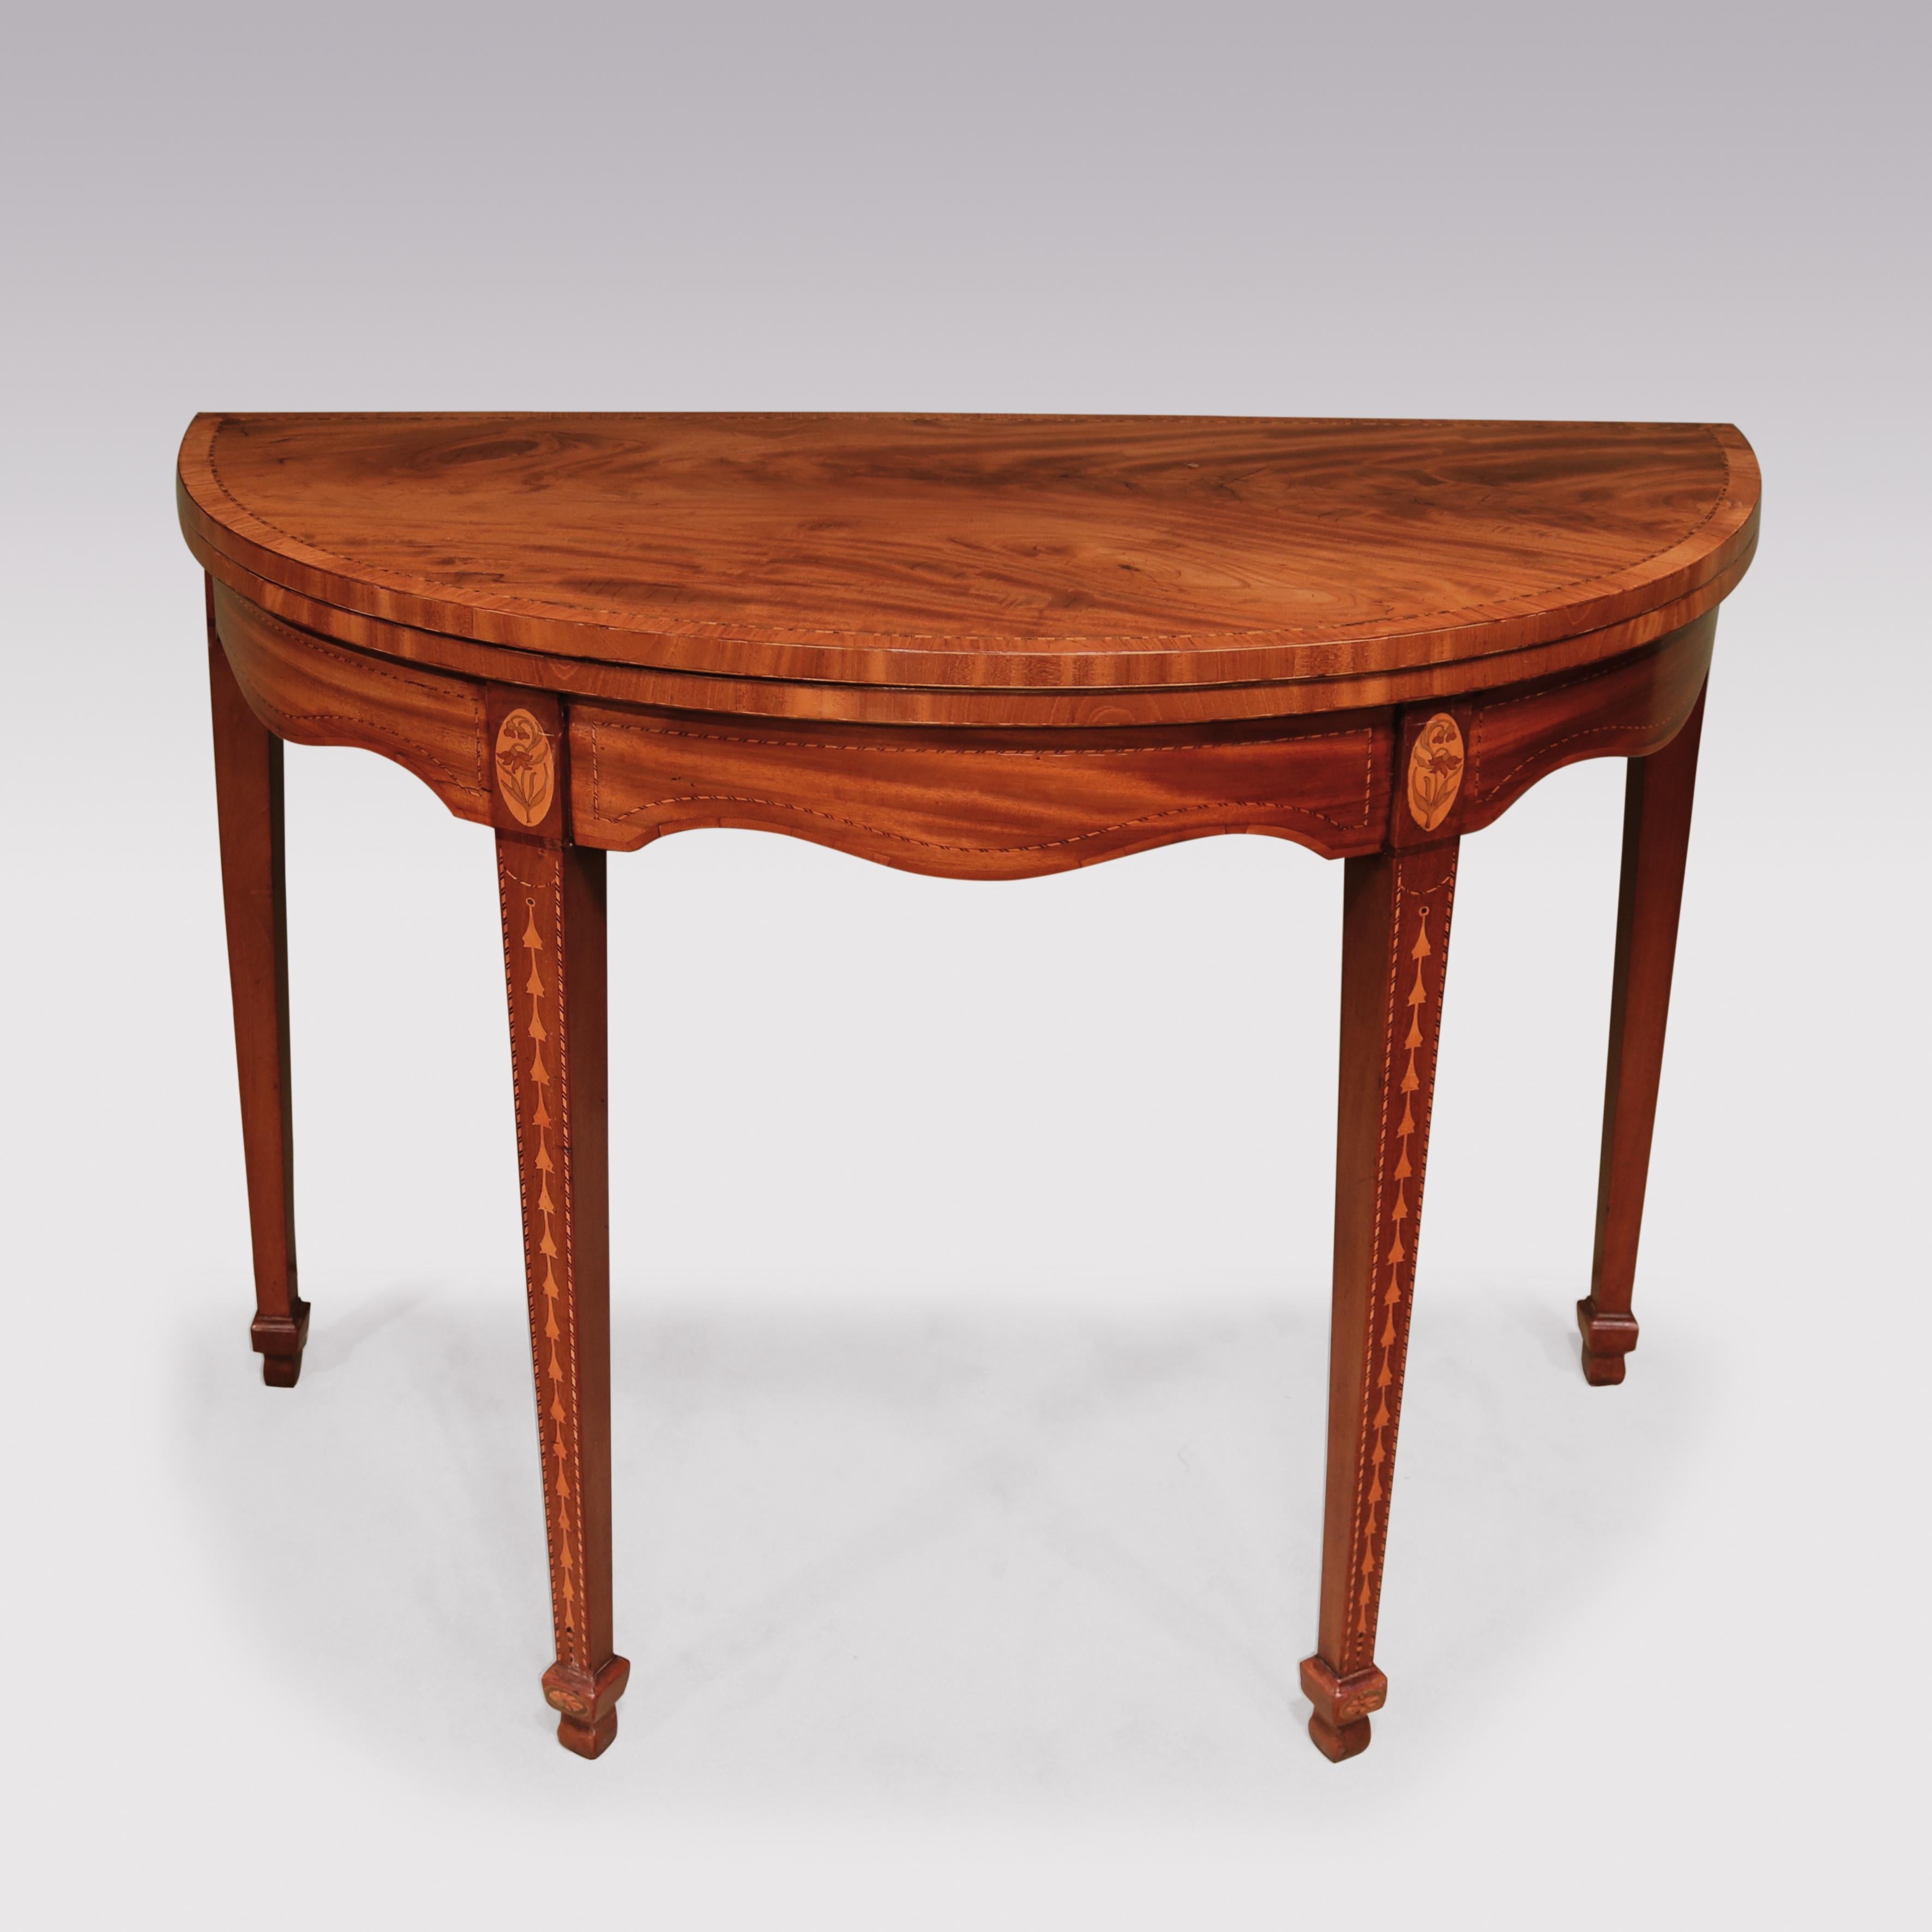 English Pair of Late 18th Century Sheraton Period Figured Mahogany Card Tables For Sale